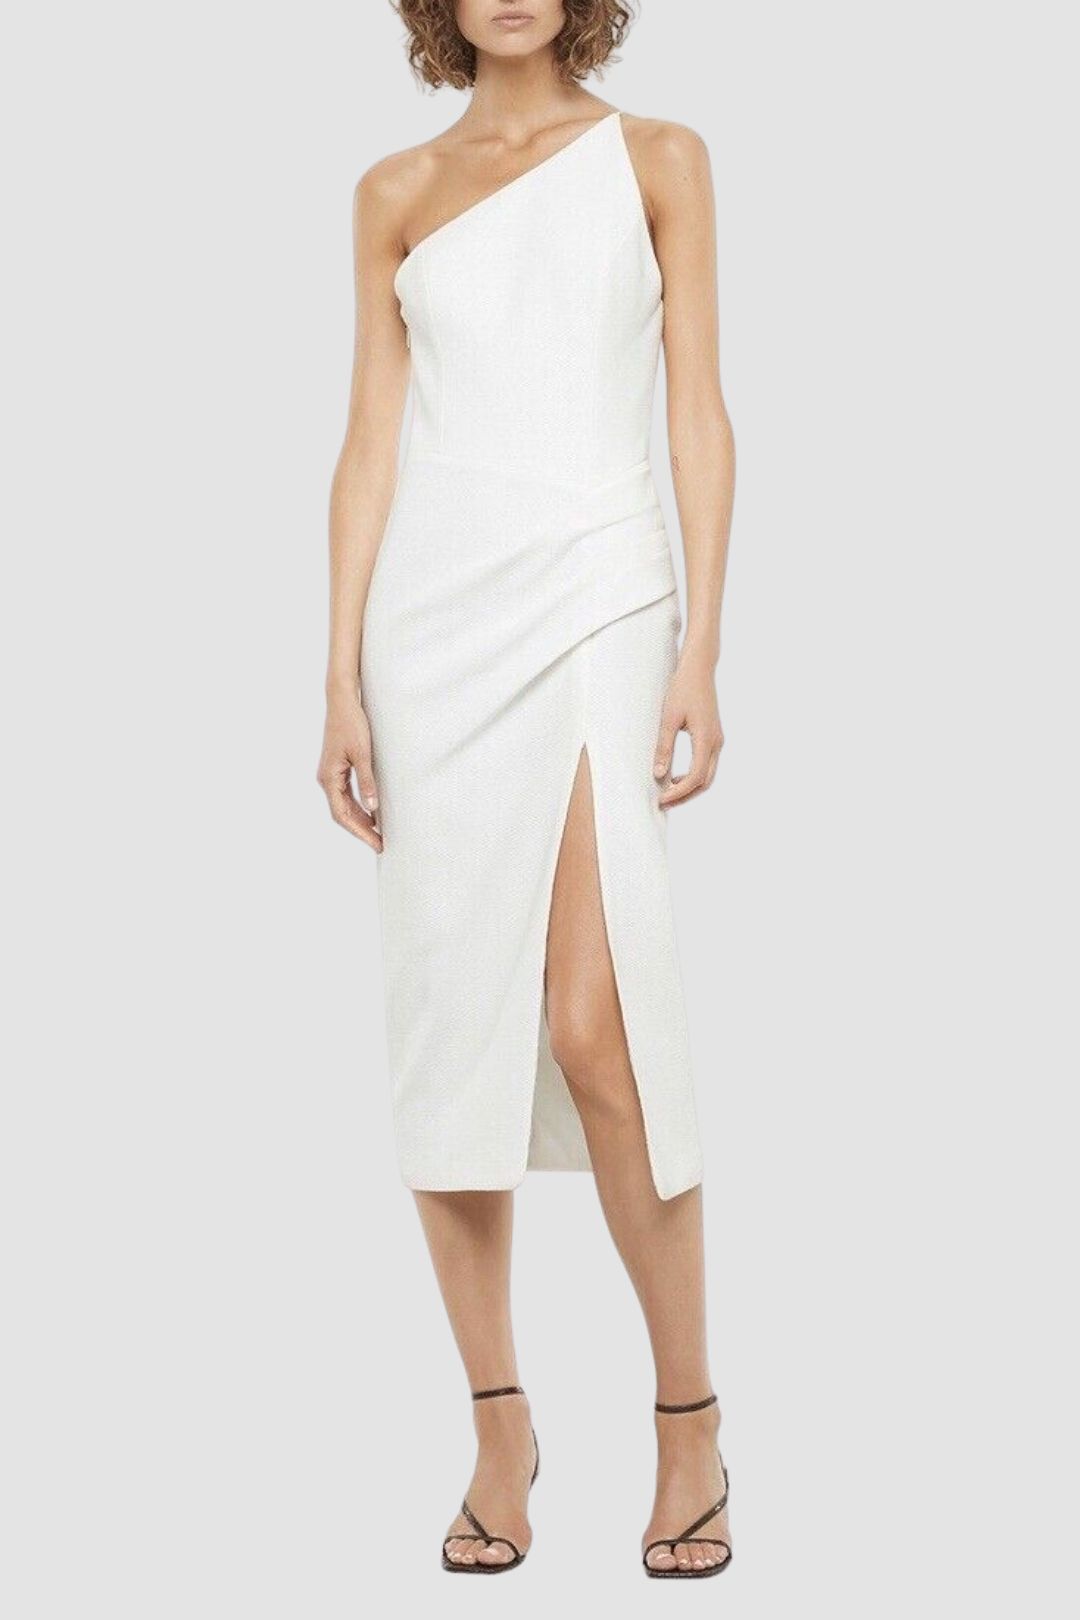 Buy Marvellous Creations One Shoulder Dress in White | Manning Cartell ...